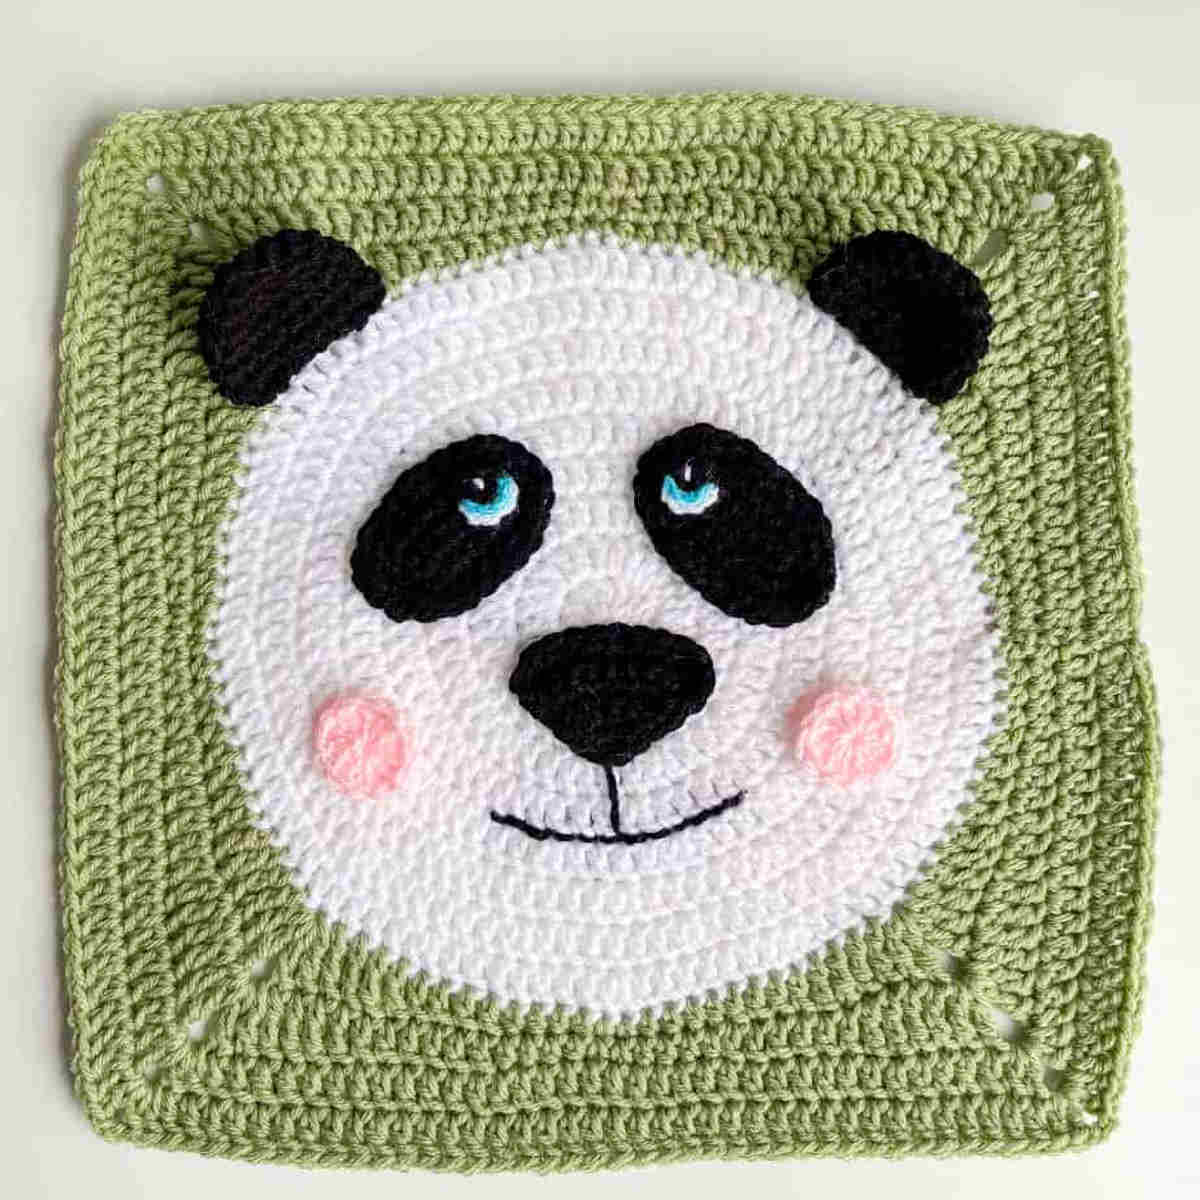 Crocheted green square with panda face in the center.